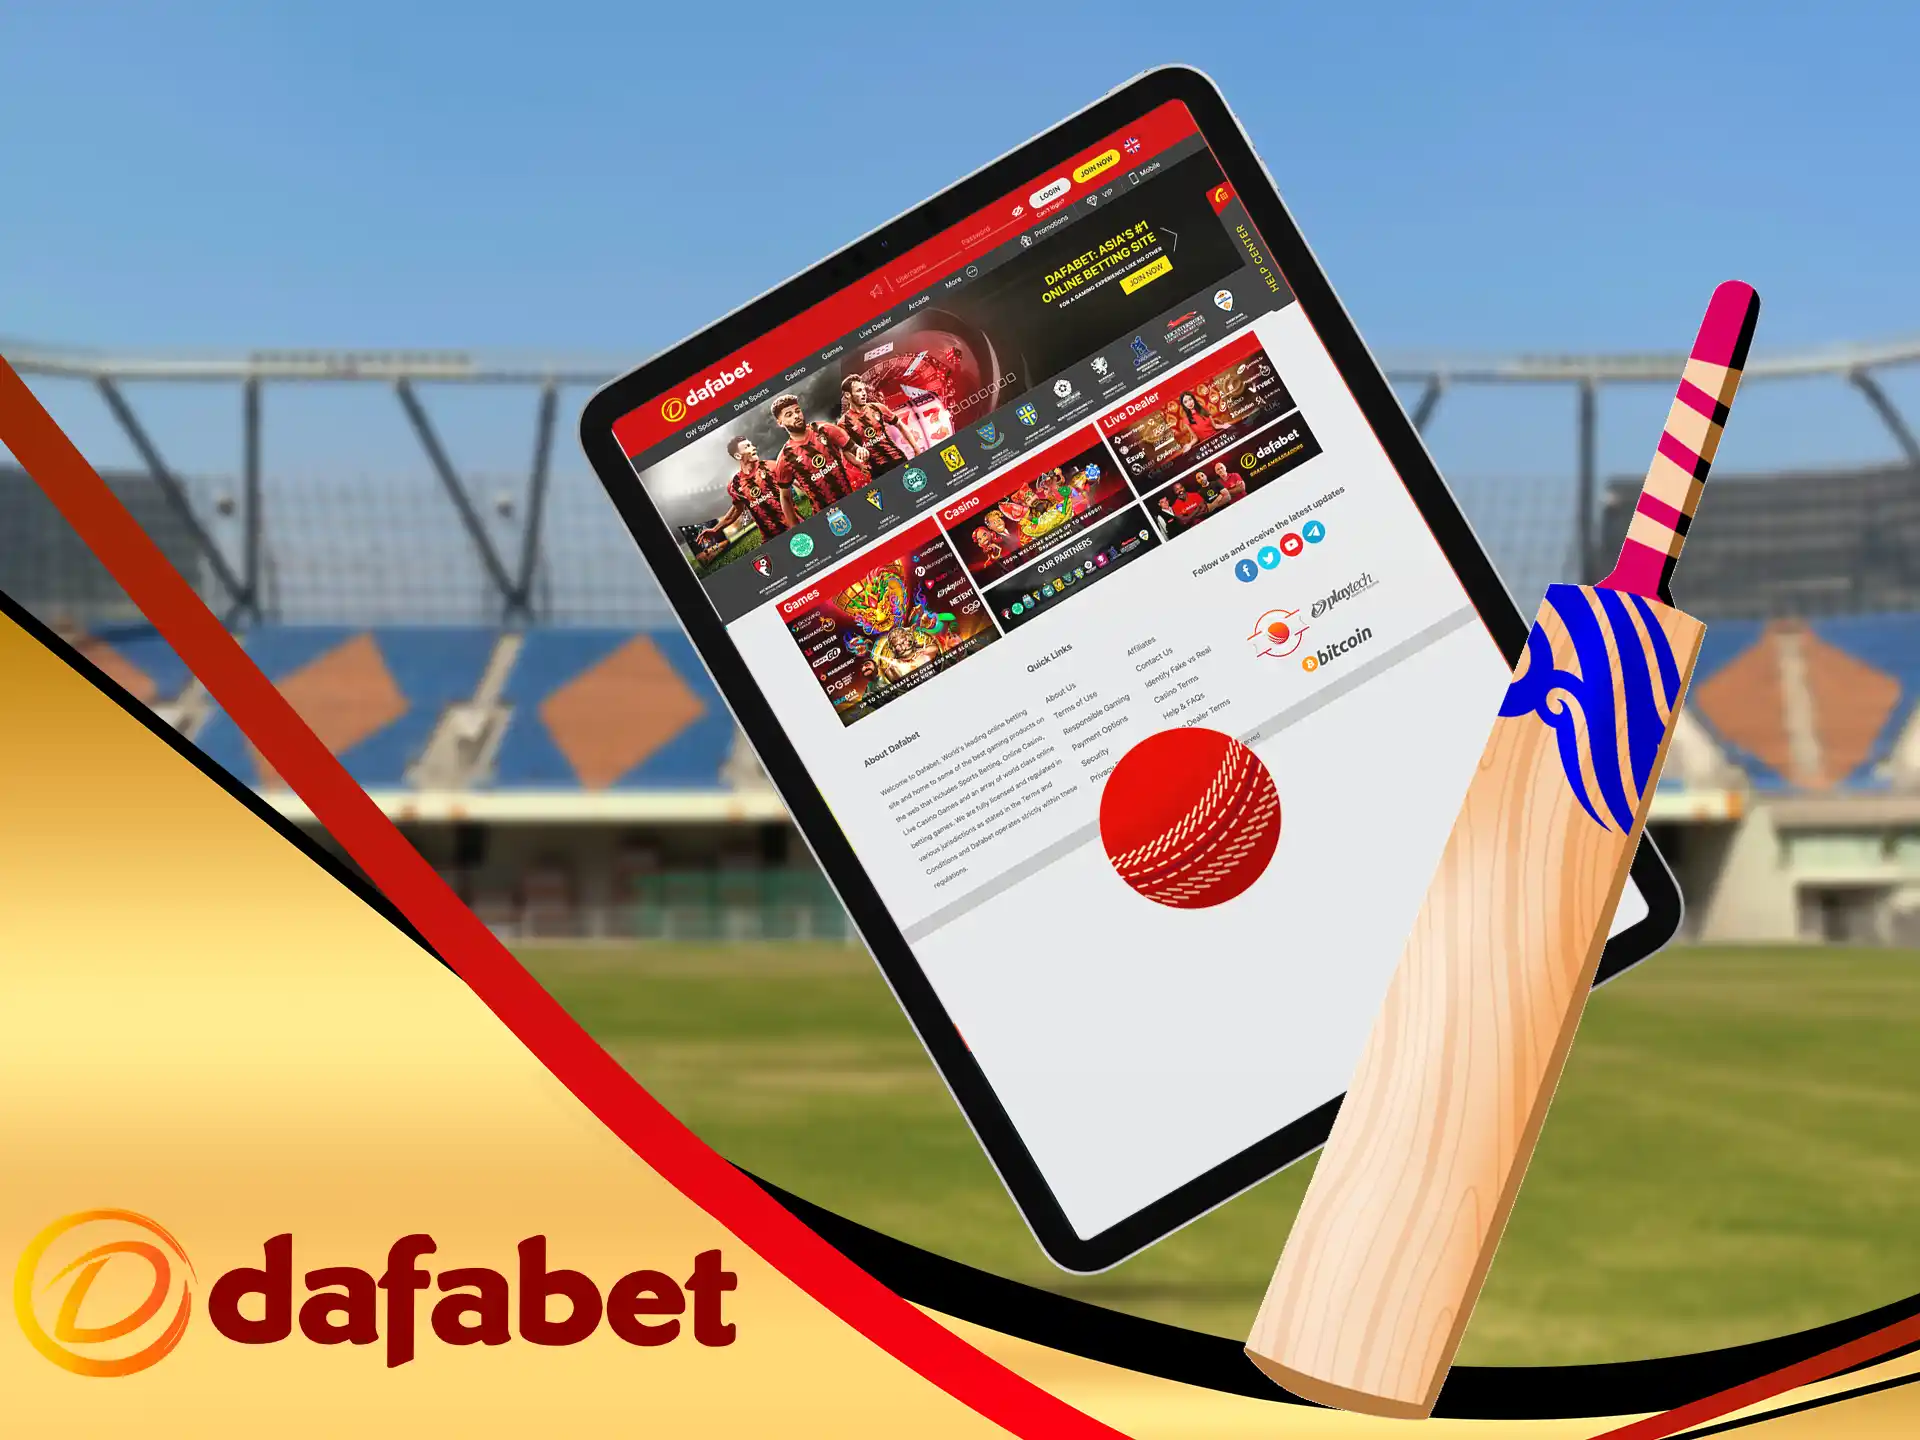 To start playing at Dafabet, a fairly popular cricket betting site in India, just create an account.